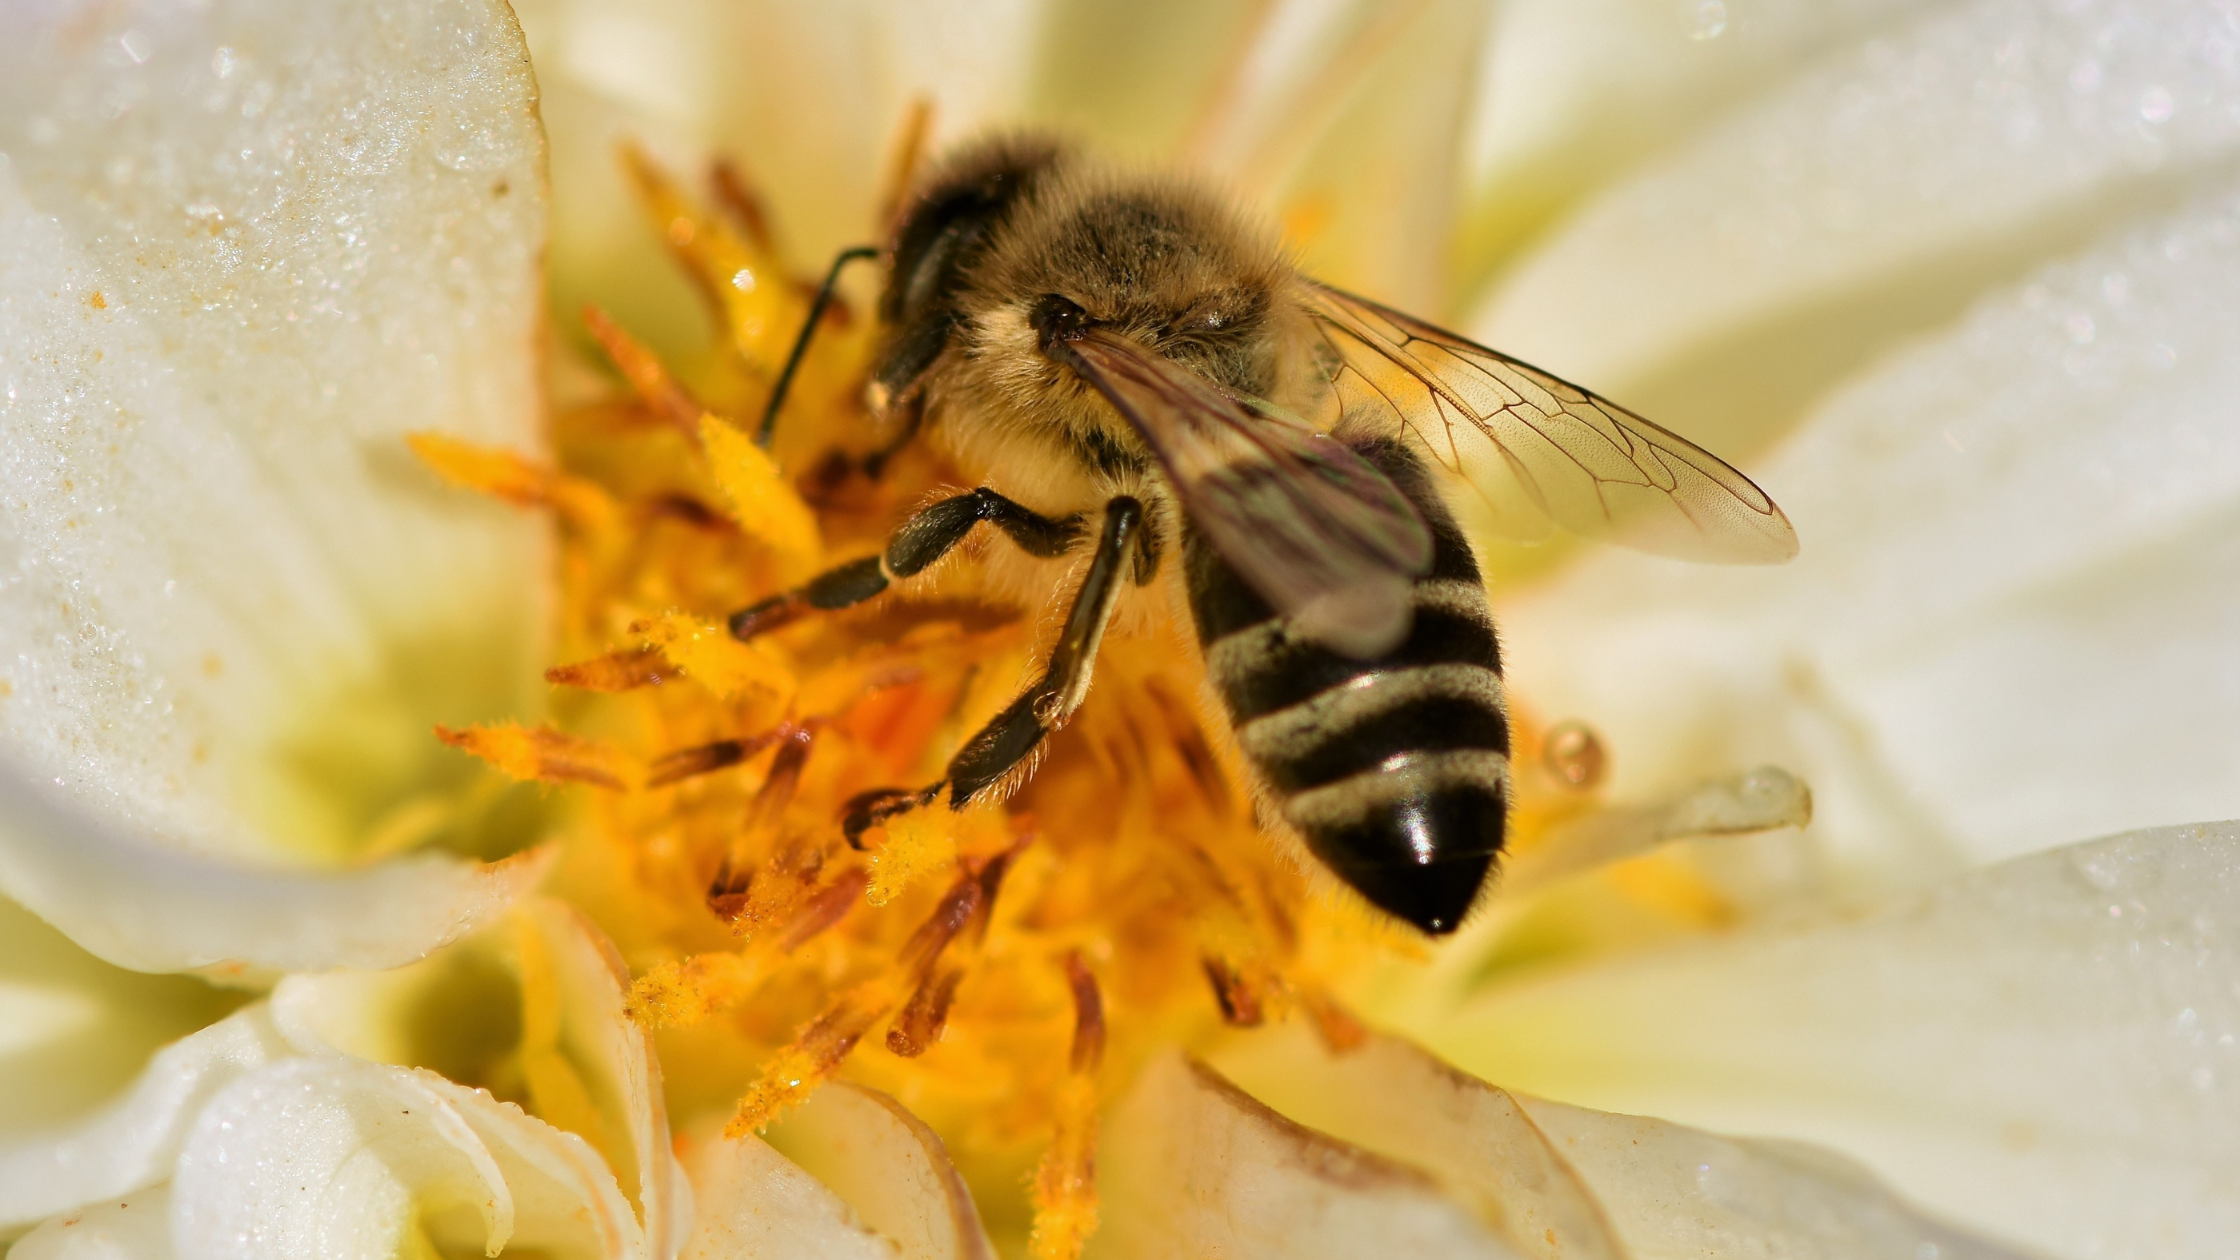 Is Lawn Care Safe for Bees?: How we Protect Pollinators